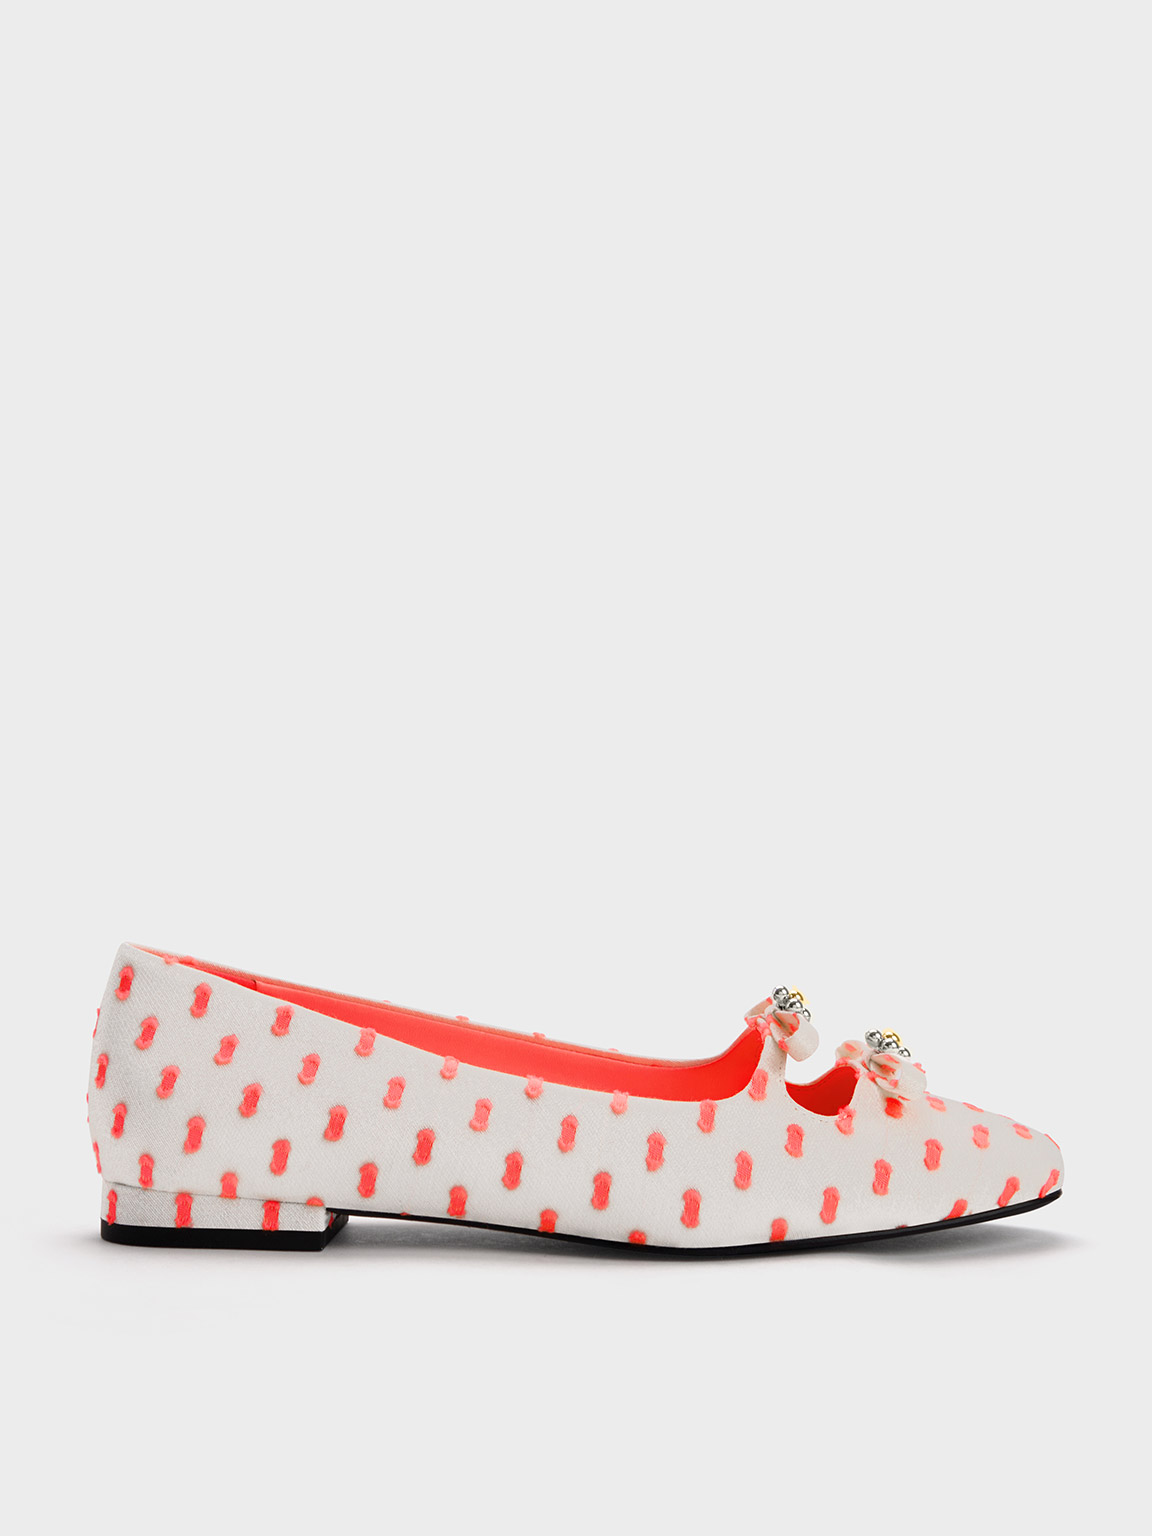 Charles & Keith Floral Beaded Printed Bow Ballerinas In Coral Pink